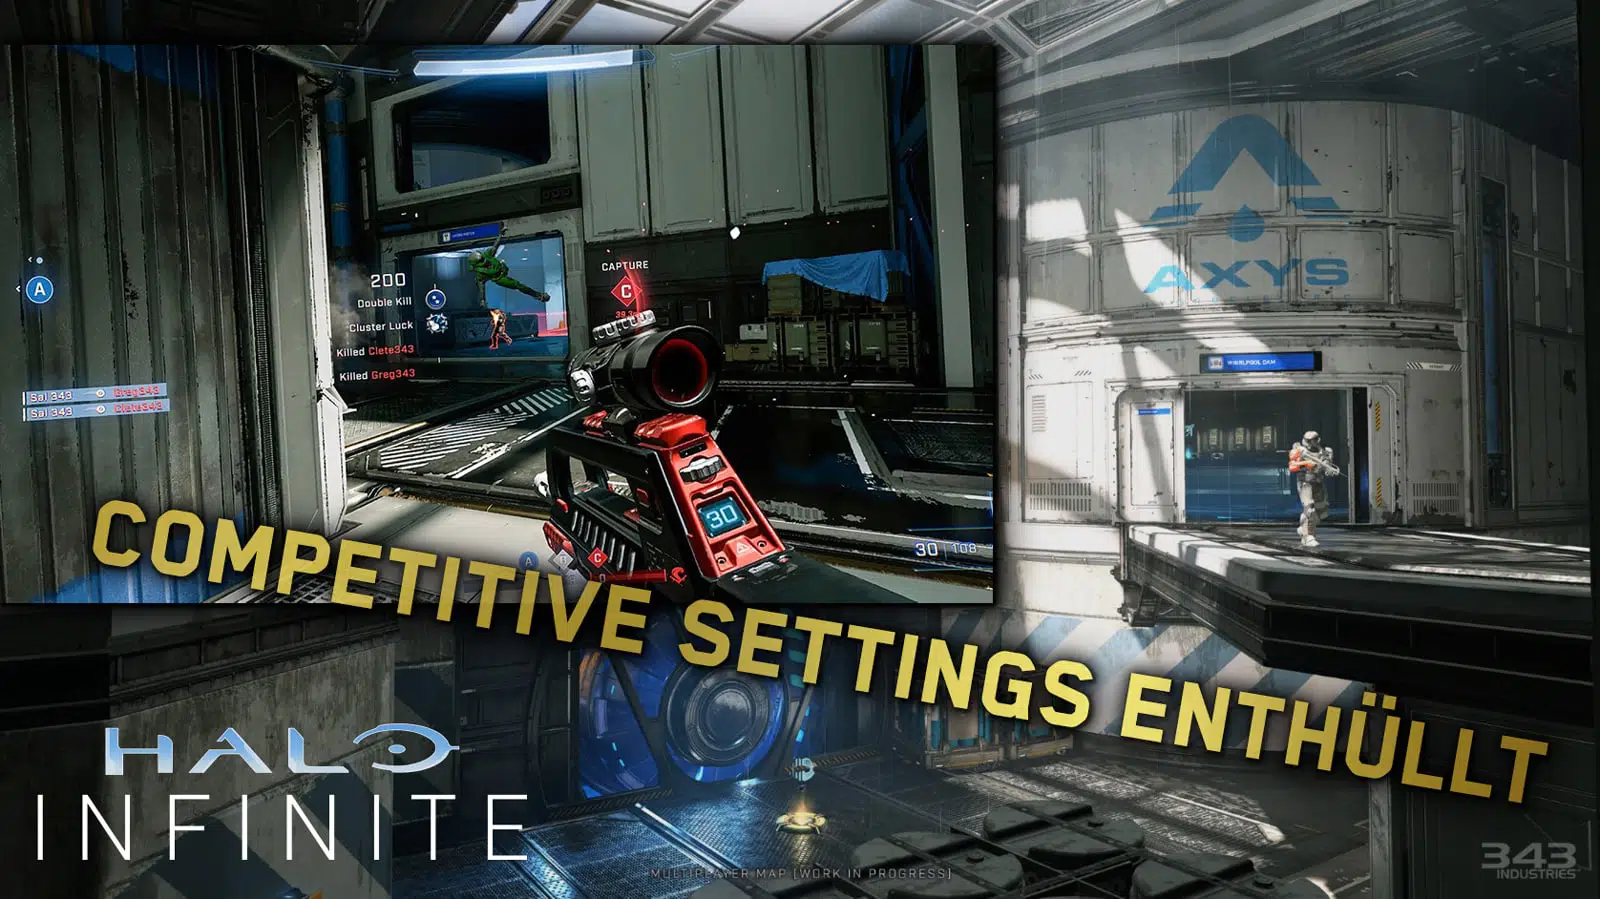 halo infinite competitive settings reveal